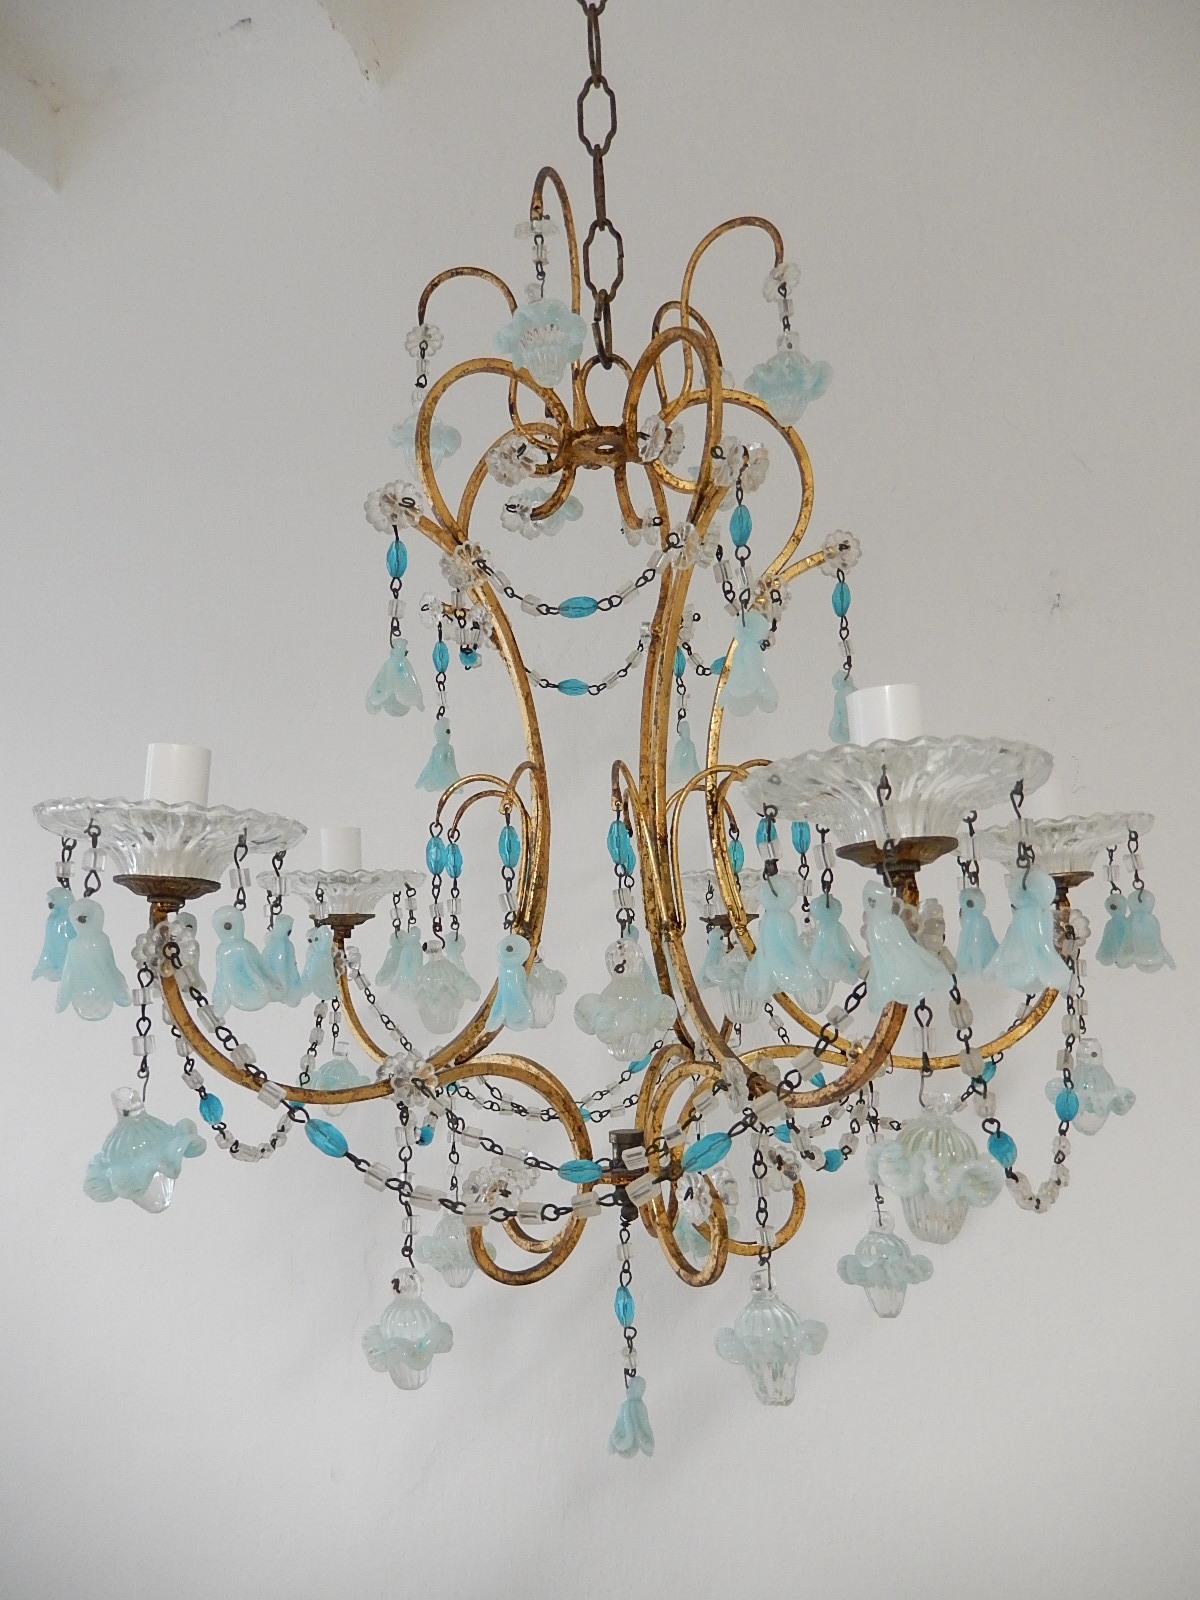 French Aqua Blue Opaline Murano Bell Flowers & Ribbons Chandelier, circa 1900 For Sale 2